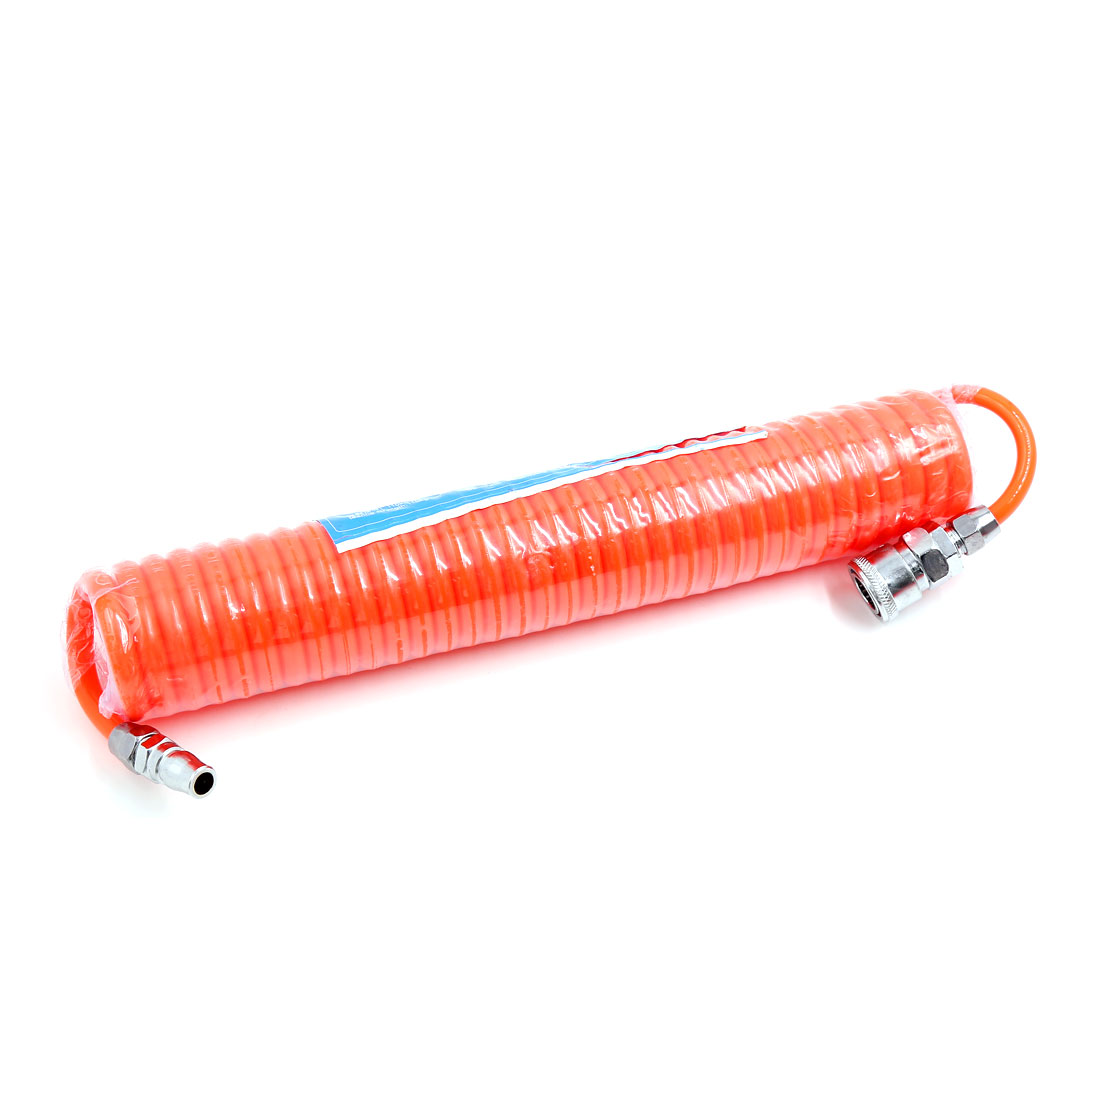 Unique Bargains 6M Length 8mm x 5mm Polyurethane Coiled Air Hose Tube Pipe Red